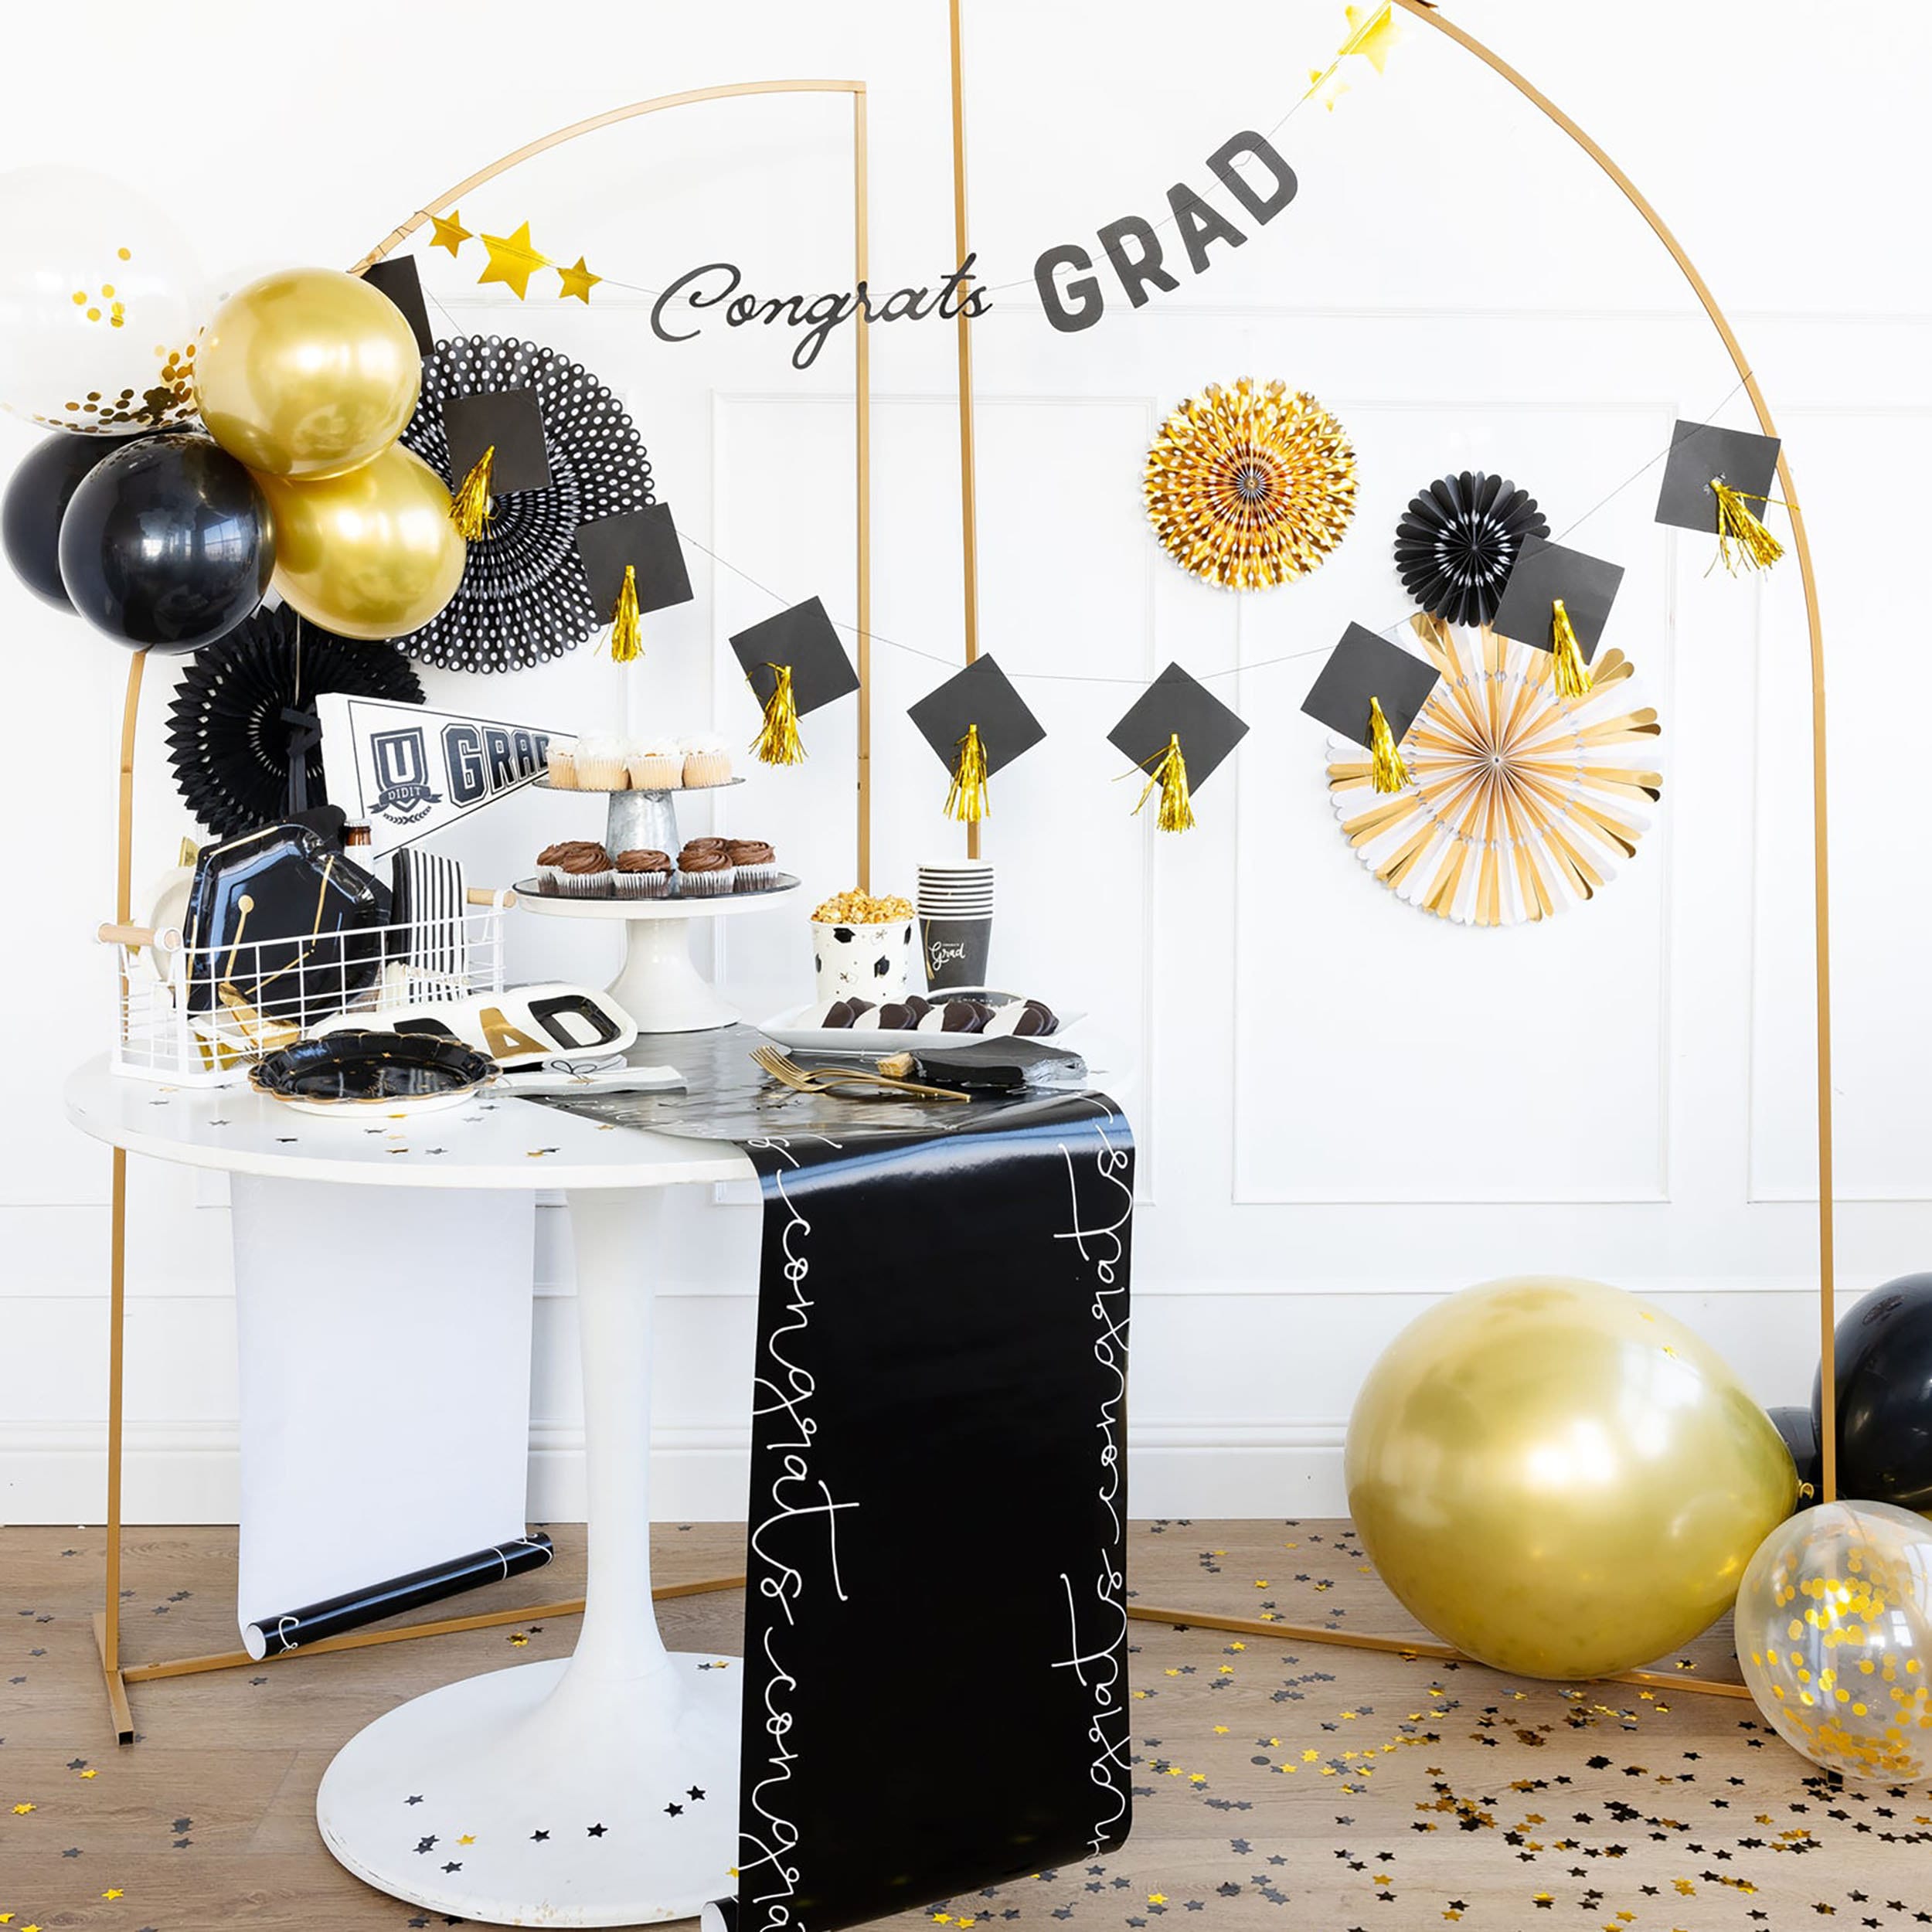 Graduation party Decorations and Supplies - with balloons, table runner, party banners, plates, napkins